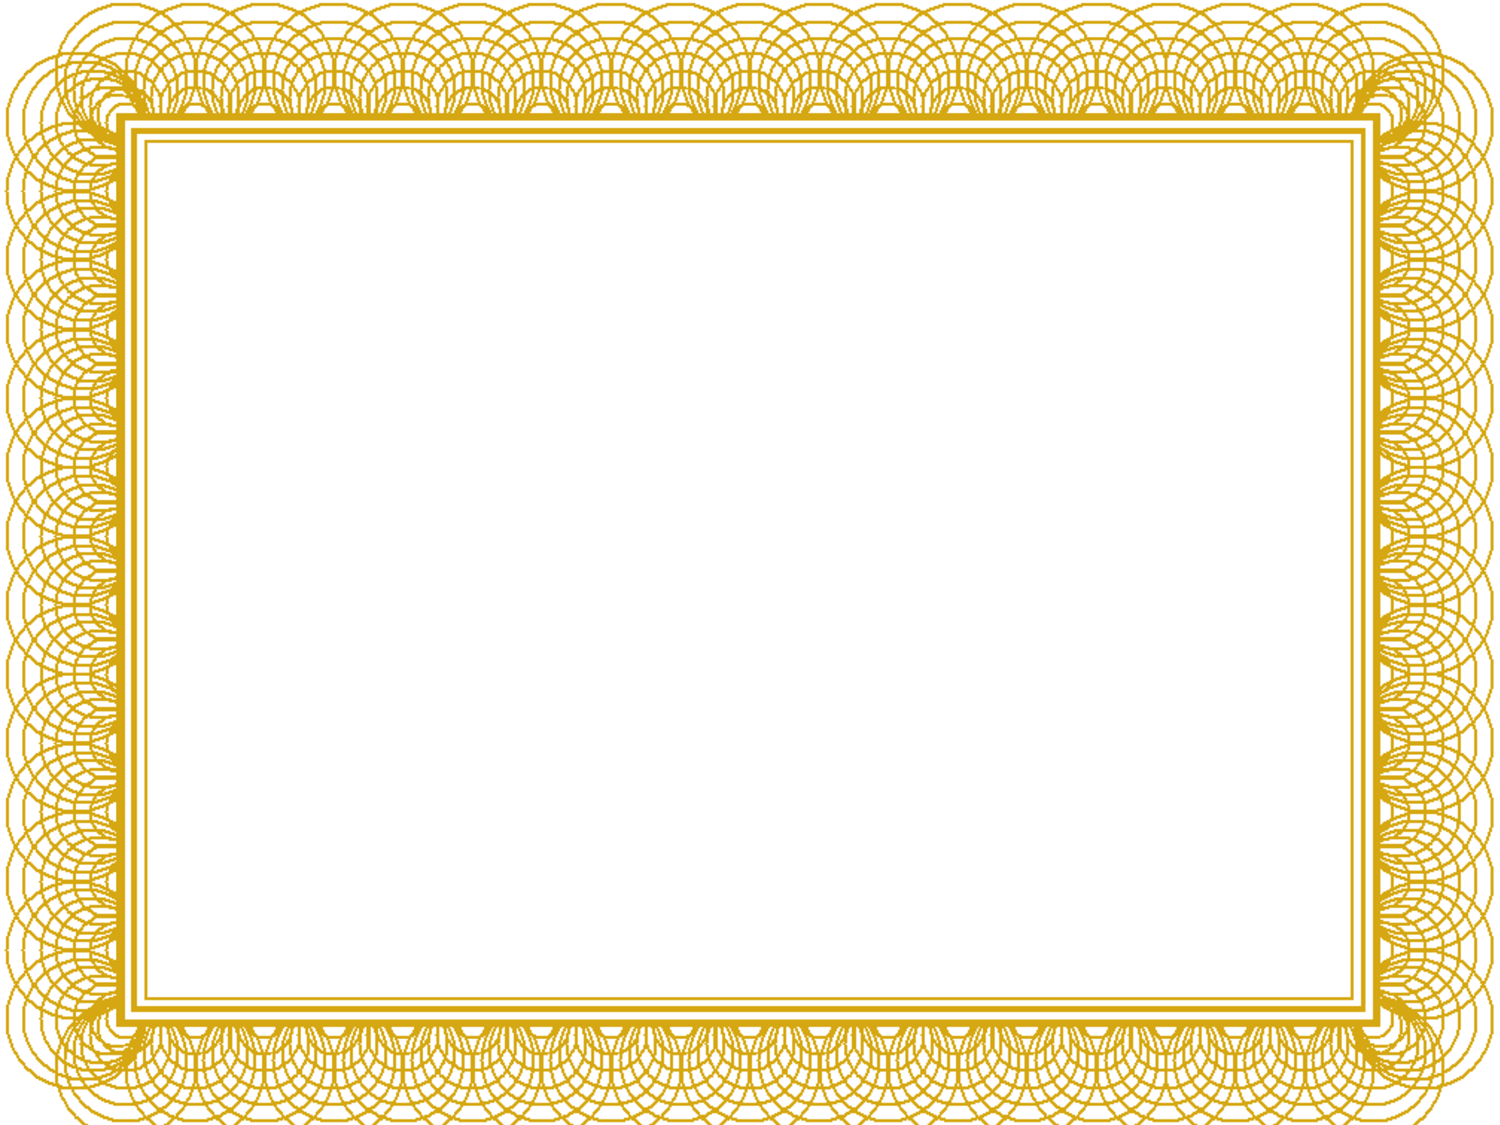 Black And Gold Page Border Frames